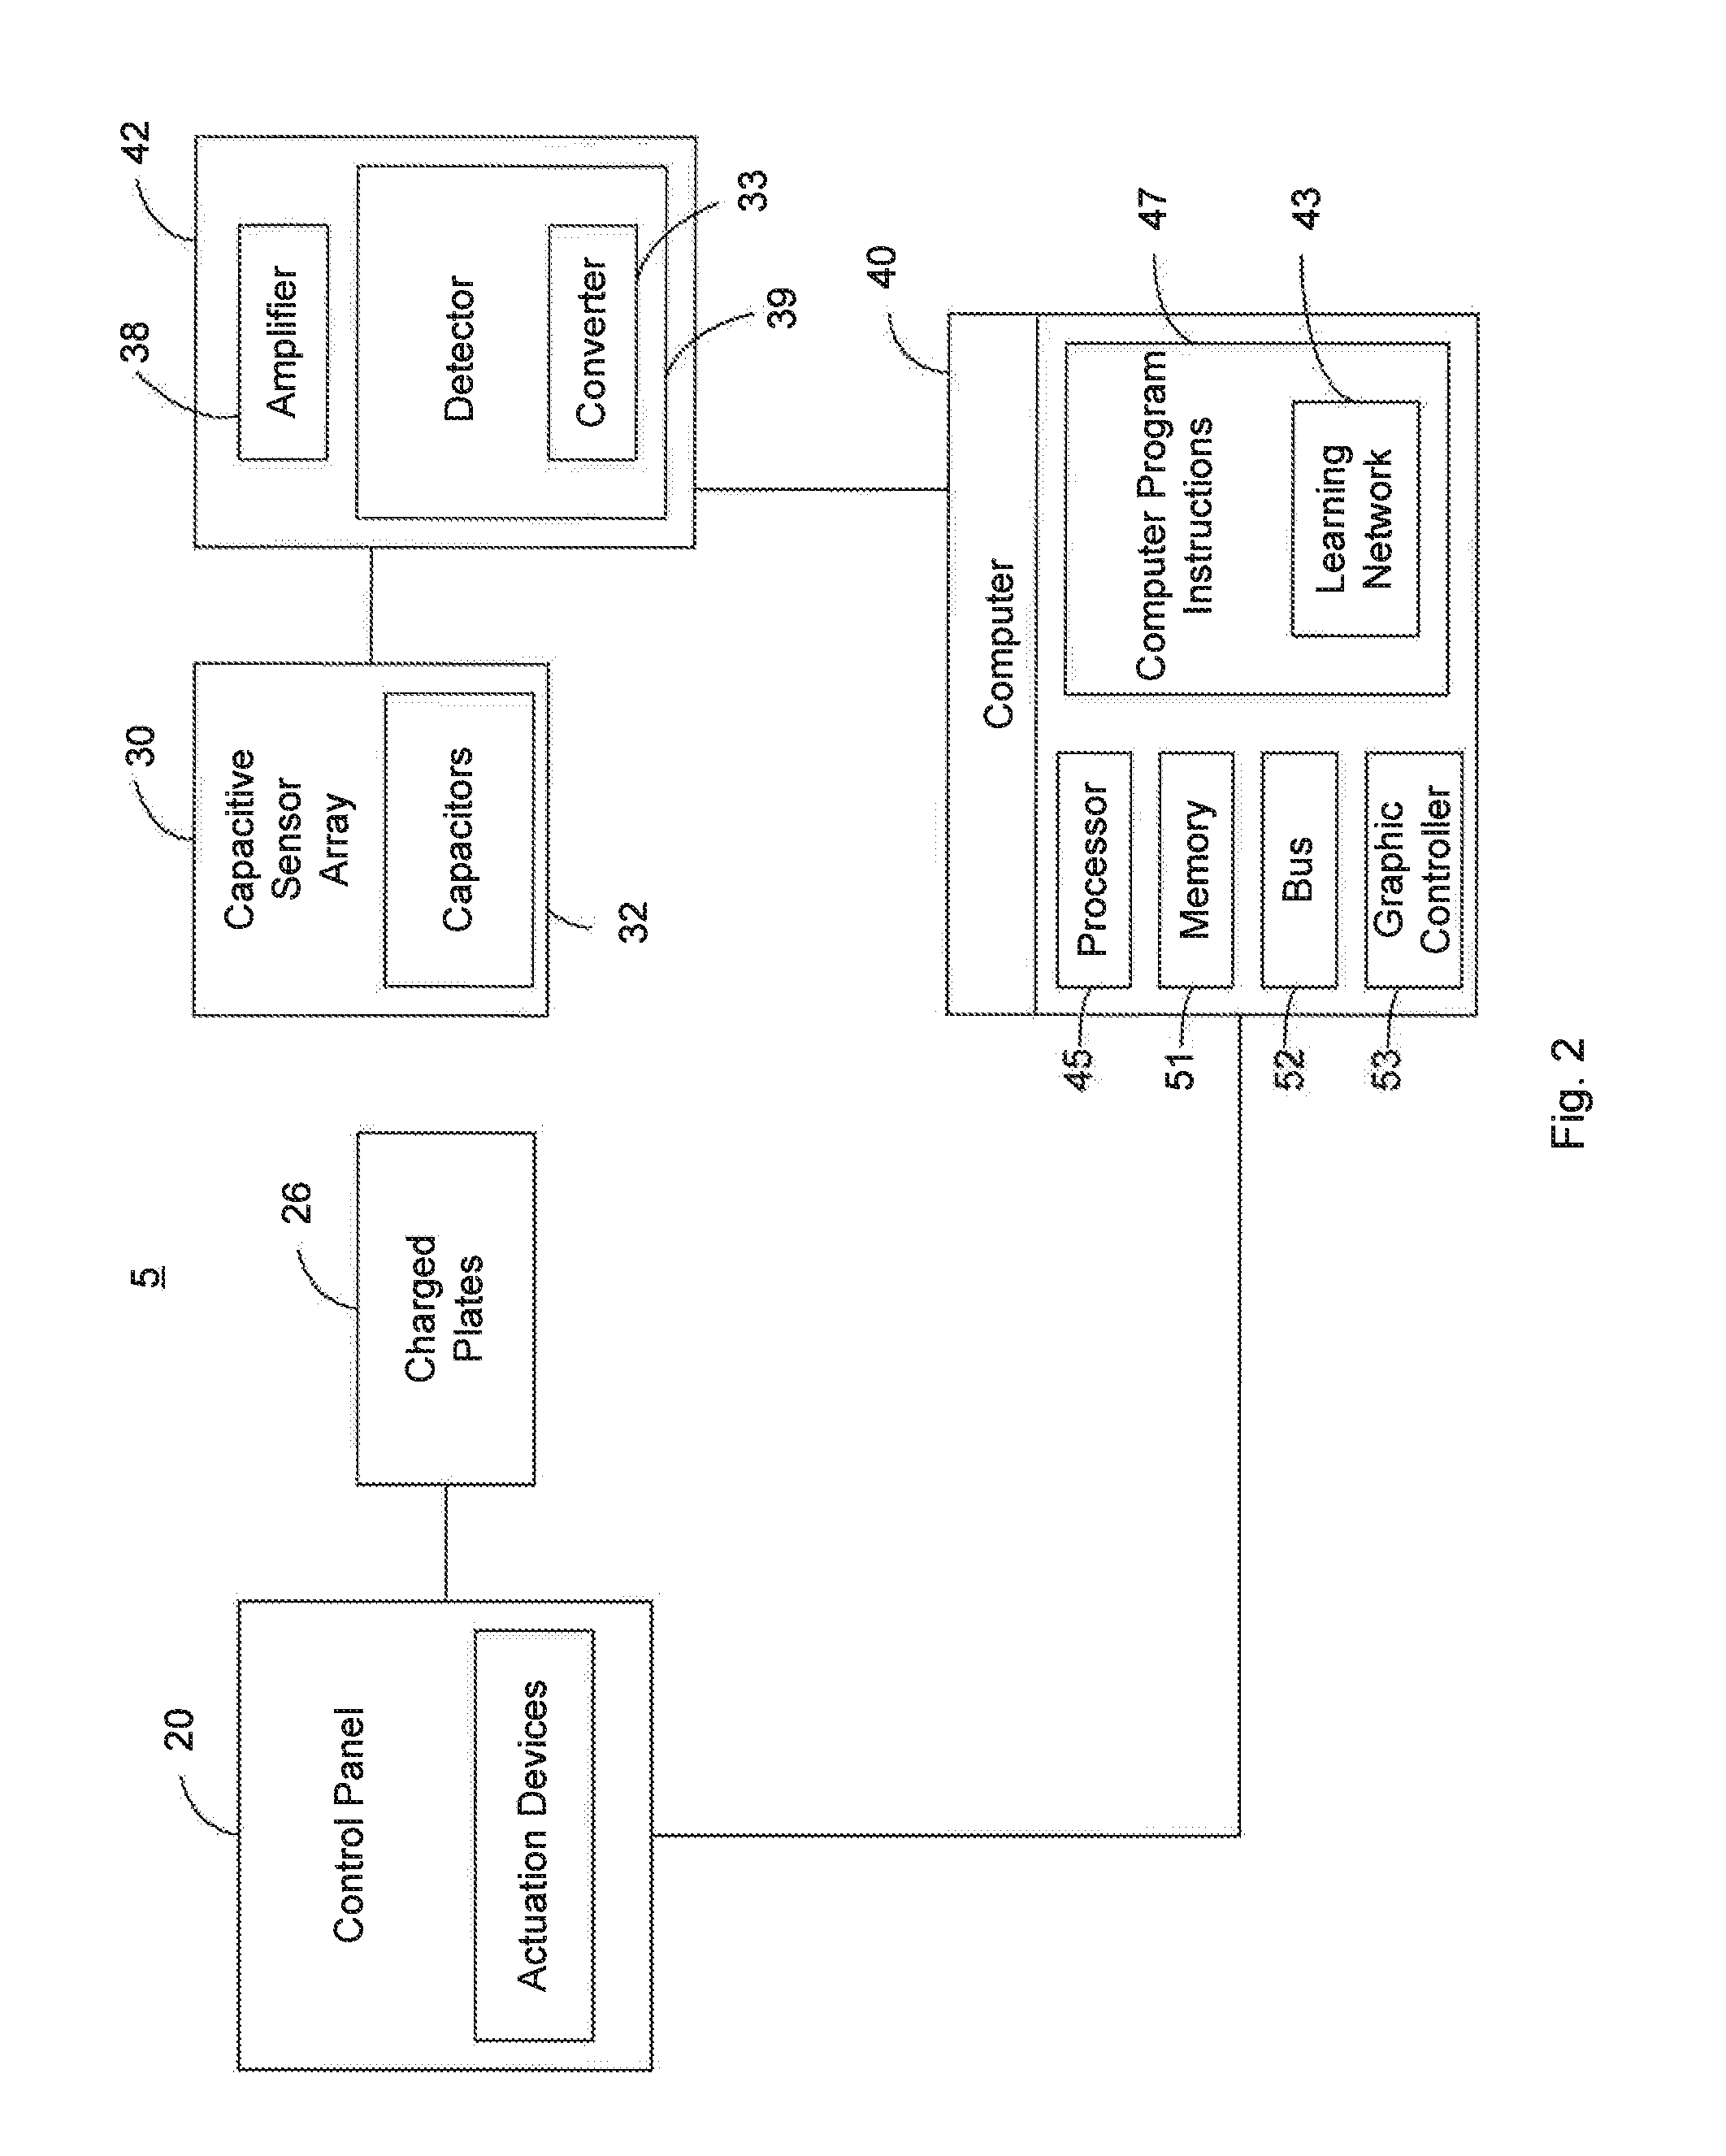 System, method, and computer program product to provide wireless sensing based on an aggregate magnetic field reading